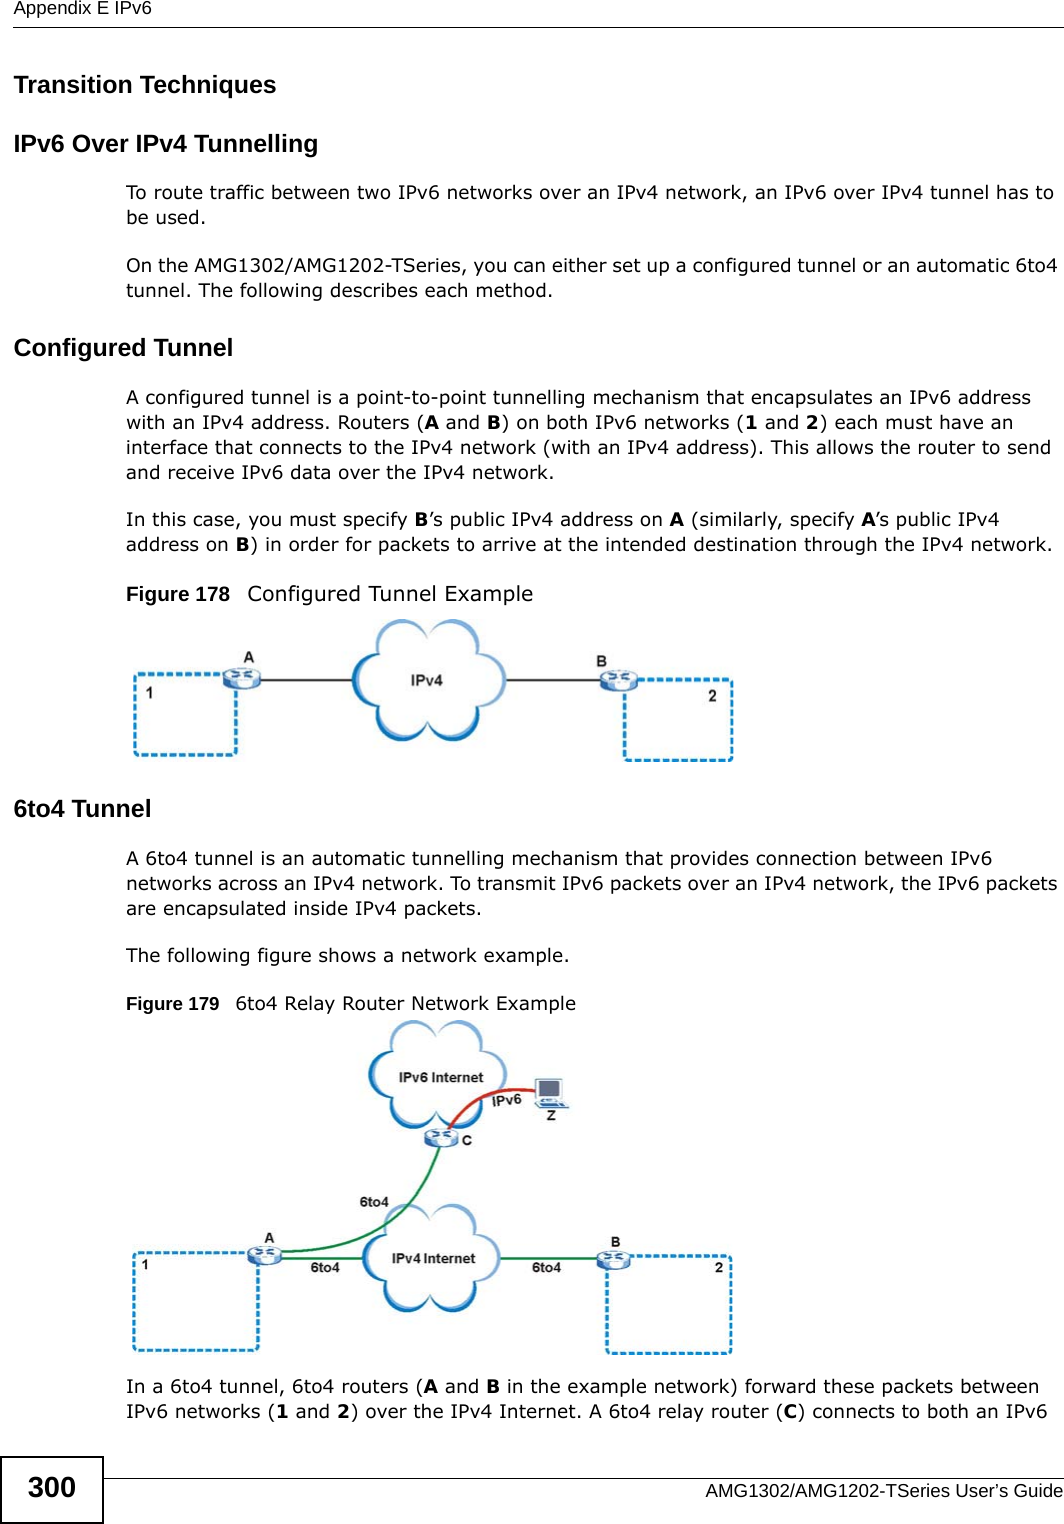 Appendix E IPv6AMG1302/AMG1202-TSeries User’s Guide300Transition TechniquesIPv6 Over IPv4 TunnellingTo route traffic between two IPv6 networks over an IPv4 network, an IPv6 over IPv4 tunnel has to be used. On the AMG1302/AMG1202-TSeries, you can either set up a configured tunnel or an automatic 6to4 tunnel. The following describes each method.  Configured TunnelA configured tunnel is a point-to-point tunnelling mechanism that encapsulates an IPv6 address with an IPv4 address. Routers (A and B) on both IPv6 networks (1 and 2) each must have an interface that connects to the IPv4 network (with an IPv4 address). This allows the router to send and receive IPv6 data over the IPv4 network. In this case, you must specify B’s public IPv4 address on A (similarly, specify A’s public IPv4 address on B) in order for packets to arrive at the intended destination through the IPv4 network. Figure 178   Configured Tunnel Example  6to4 TunnelA 6to4 tunnel is an automatic tunnelling mechanism that provides connection between IPv6 networks across an IPv4 network. To transmit IPv6 packets over an IPv4 network, the IPv6 packets are encapsulated inside IPv4 packets. The following figure shows a network example. Figure 179   6to4 Relay Router Network Example In a 6to4 tunnel, 6to4 routers (A and B in the example network) forward these packets between IPv6 networks (1 and 2) over the IPv4 Internet. A 6to4 relay router (C) connects to both an IPv6 